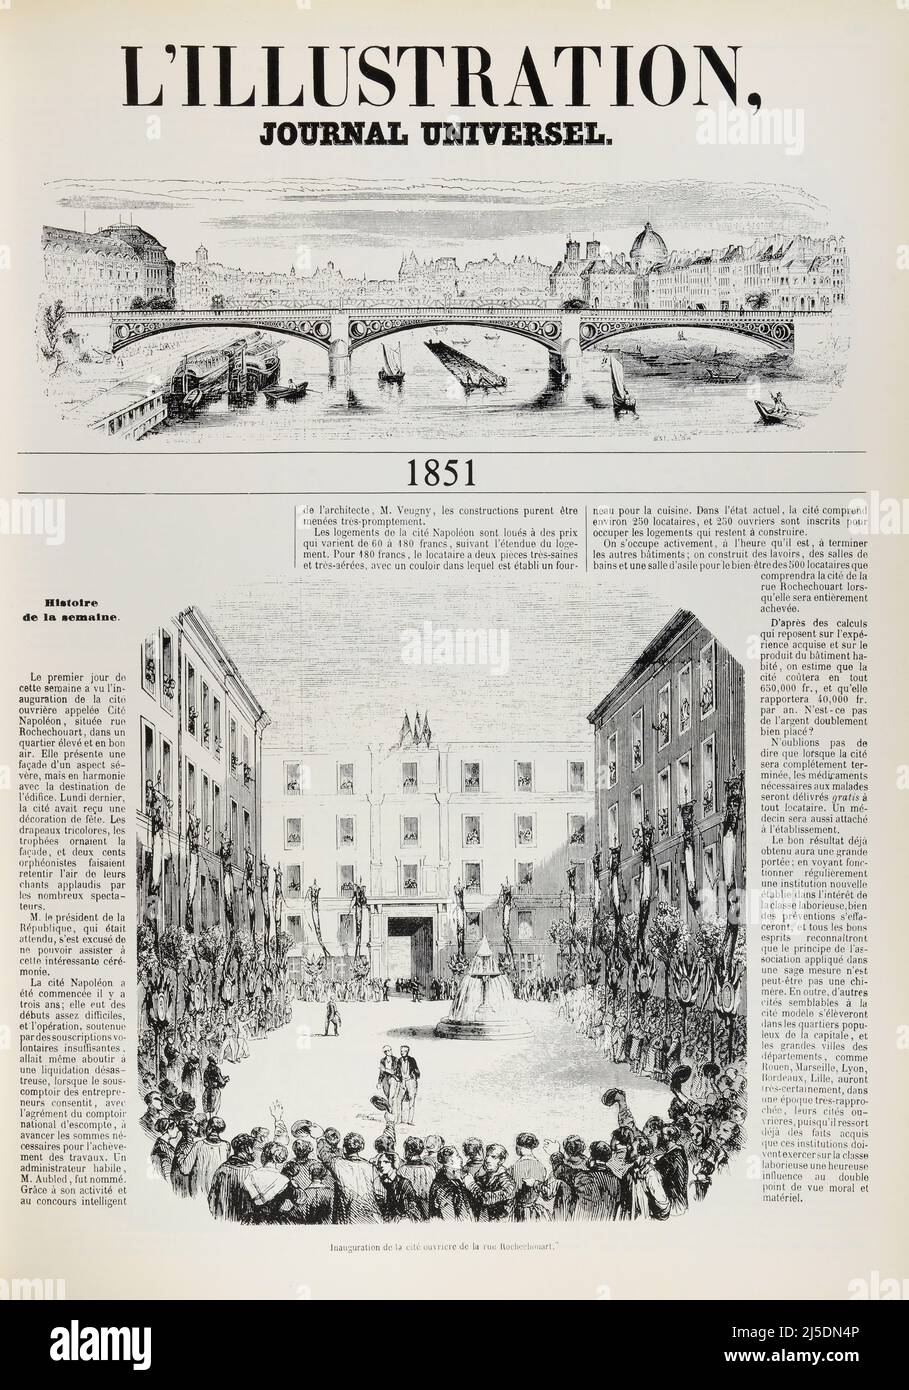 Eng translation : ' Inauguration of the workers' housing estate on rue Rochechouart ' - Original in french : ' Inauguration de la cité ouvrière de la rue Rochechouart ' - Extract from 'L'Illustration Journal Universel' - French illustrated magazine - 1851 Stock Photo